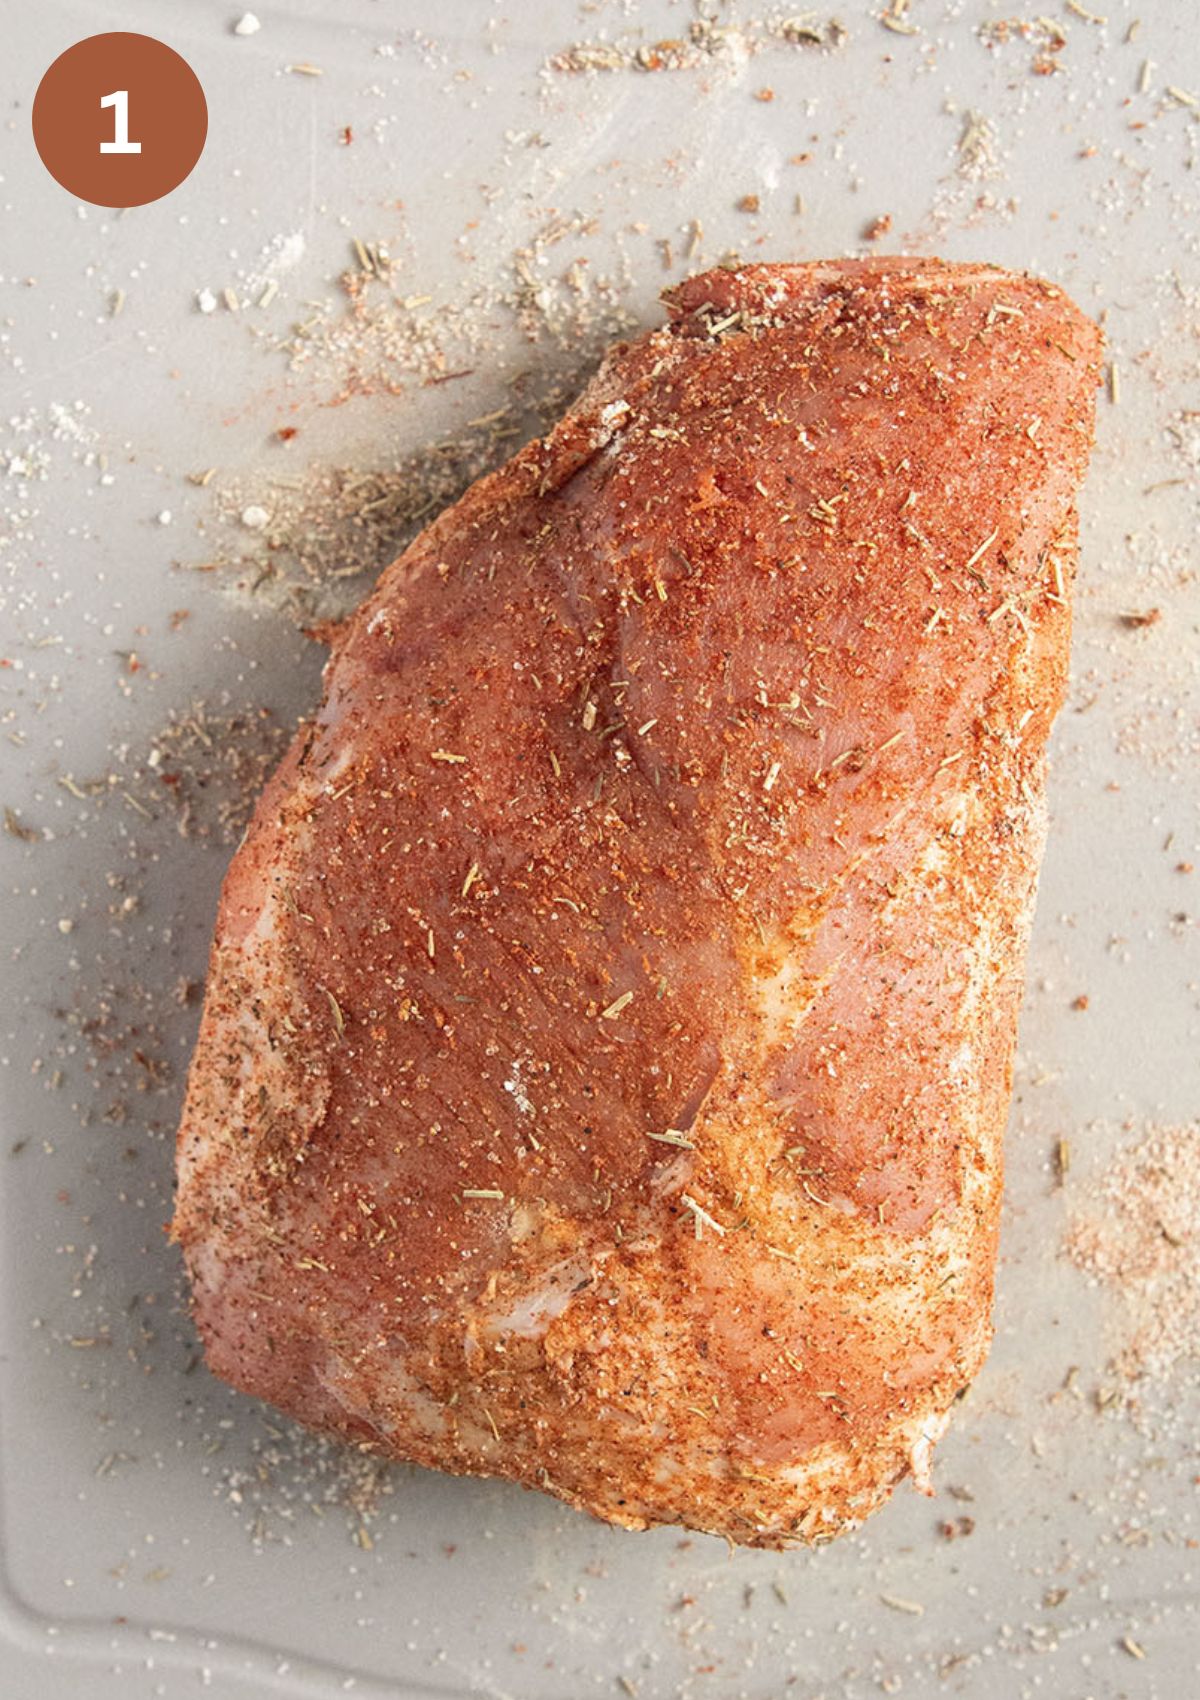 raw piece of pork shoulder seasoned with a spice blend.